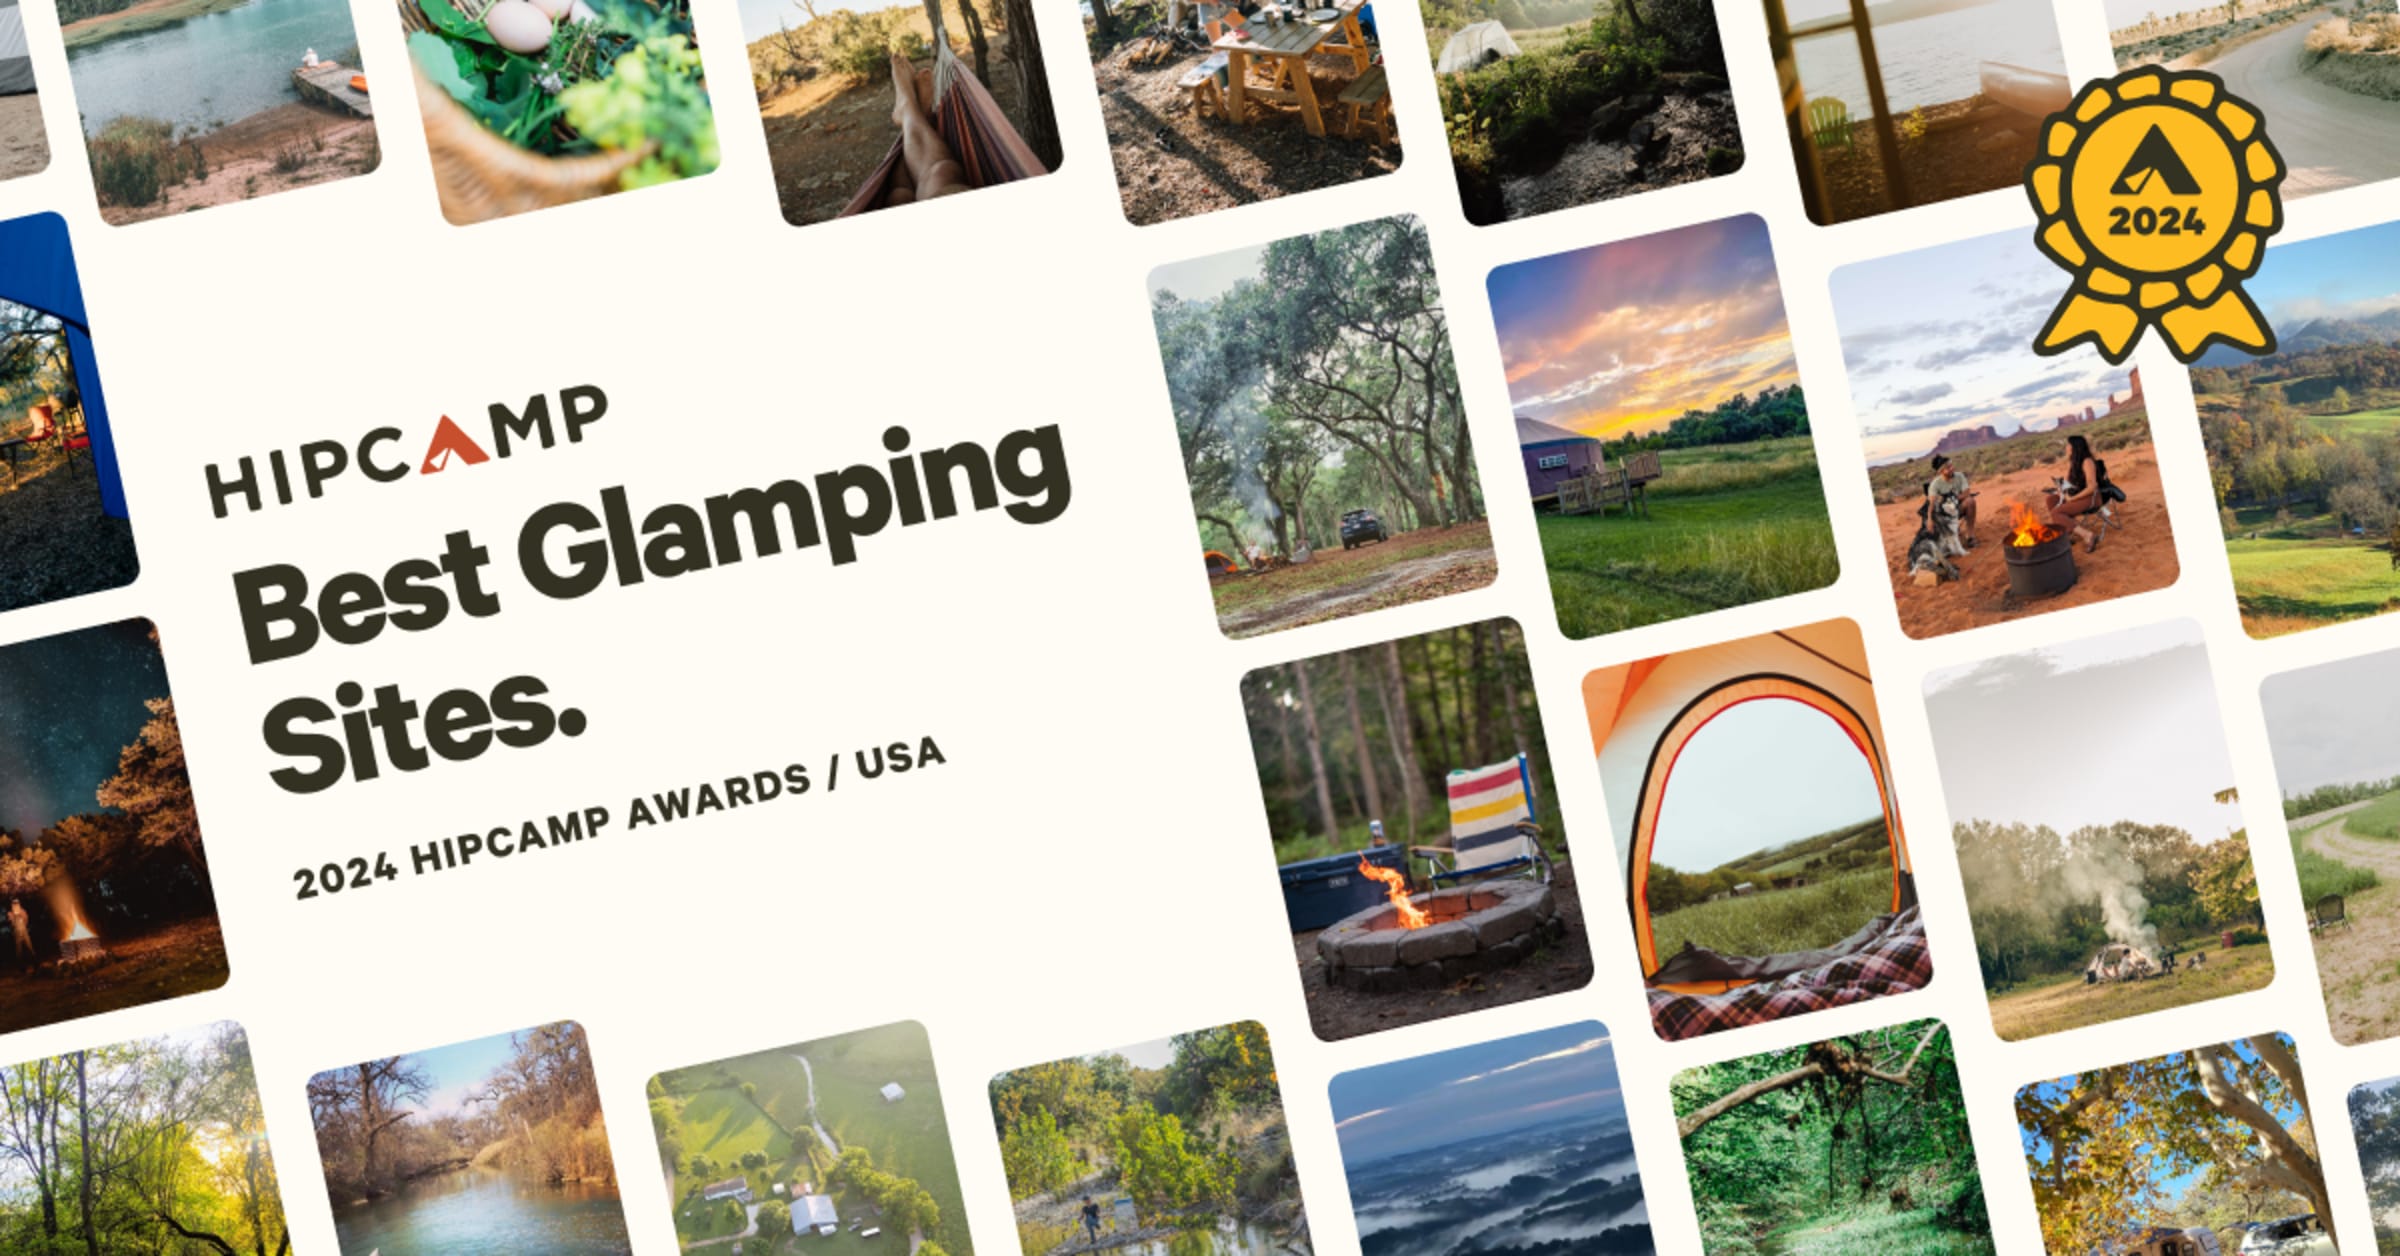 Hipcamp Awards 2024: Best Glamping Sites in the US